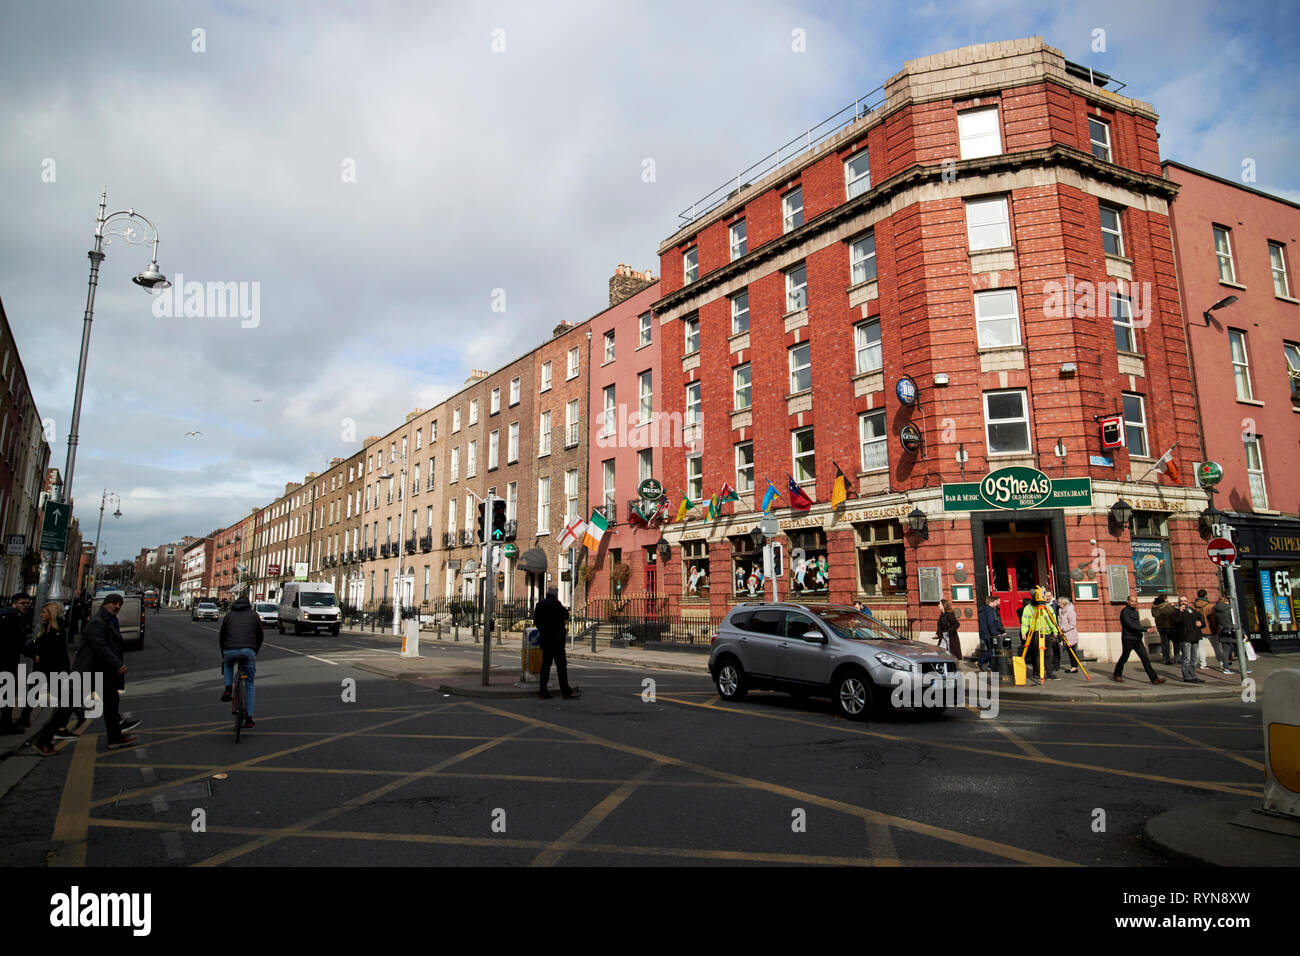 Gardiner Street Dublin High Resolution Stock Photography and Images - Alamy